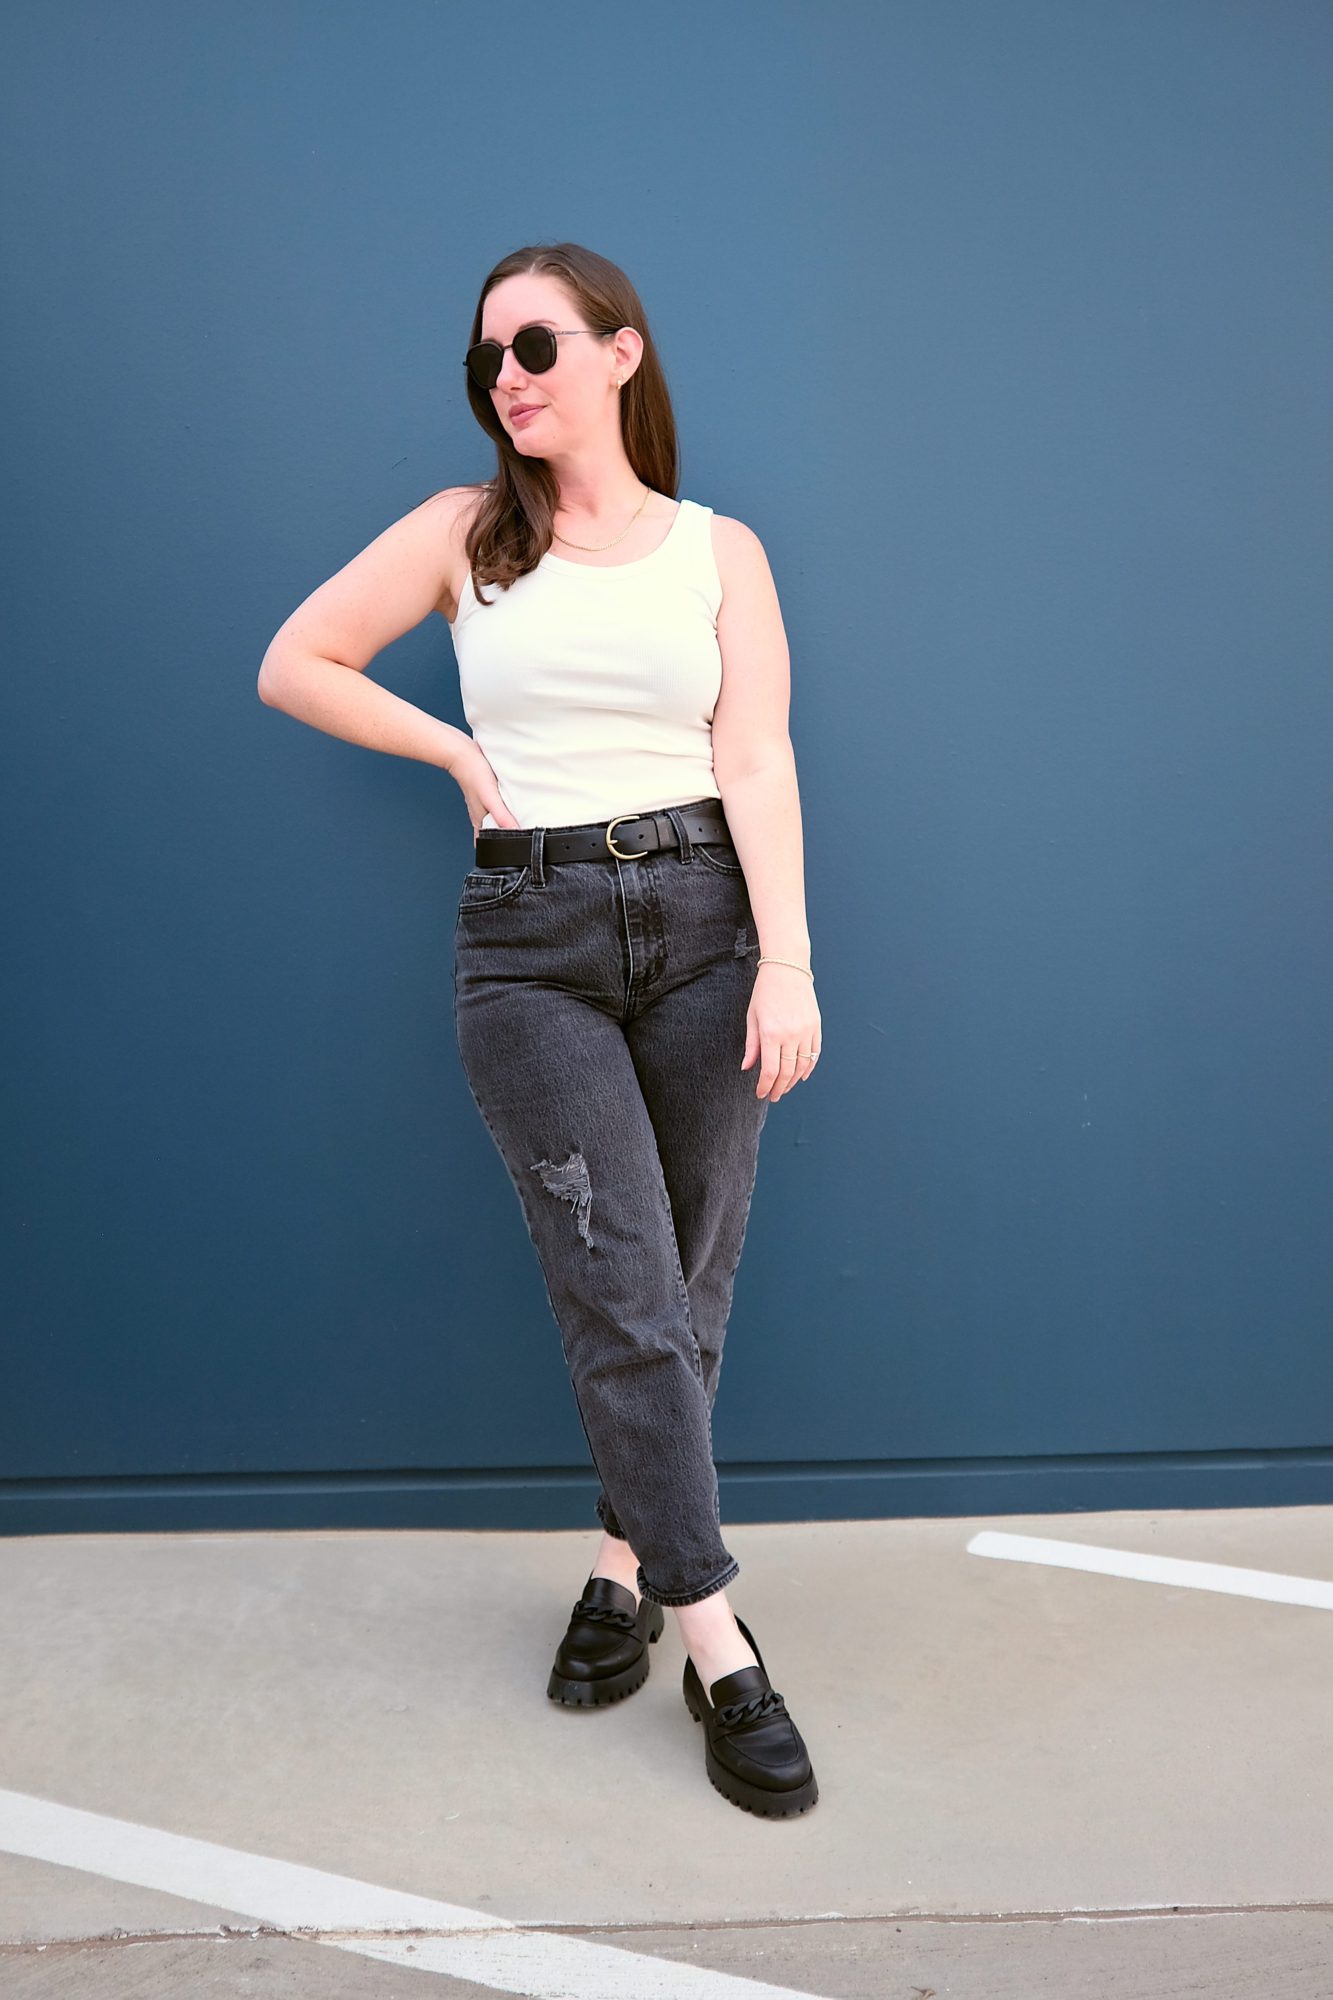 Alyssa wears the Roitfield Ribbed Tank with black jeans and loafers